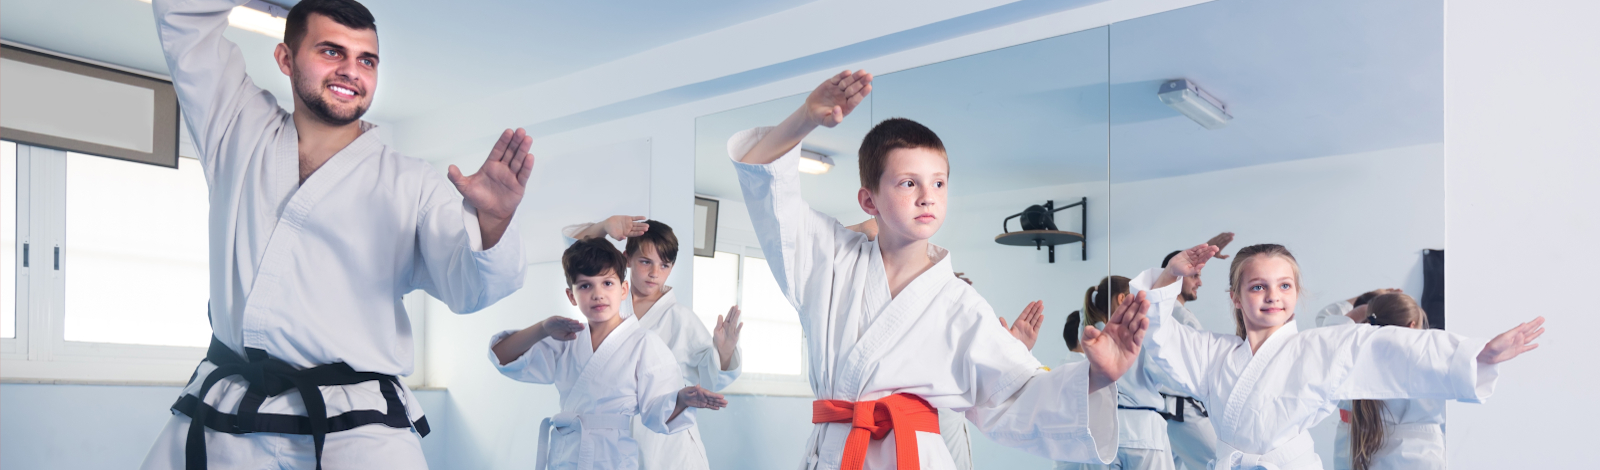 Karate classroom with teacher and students